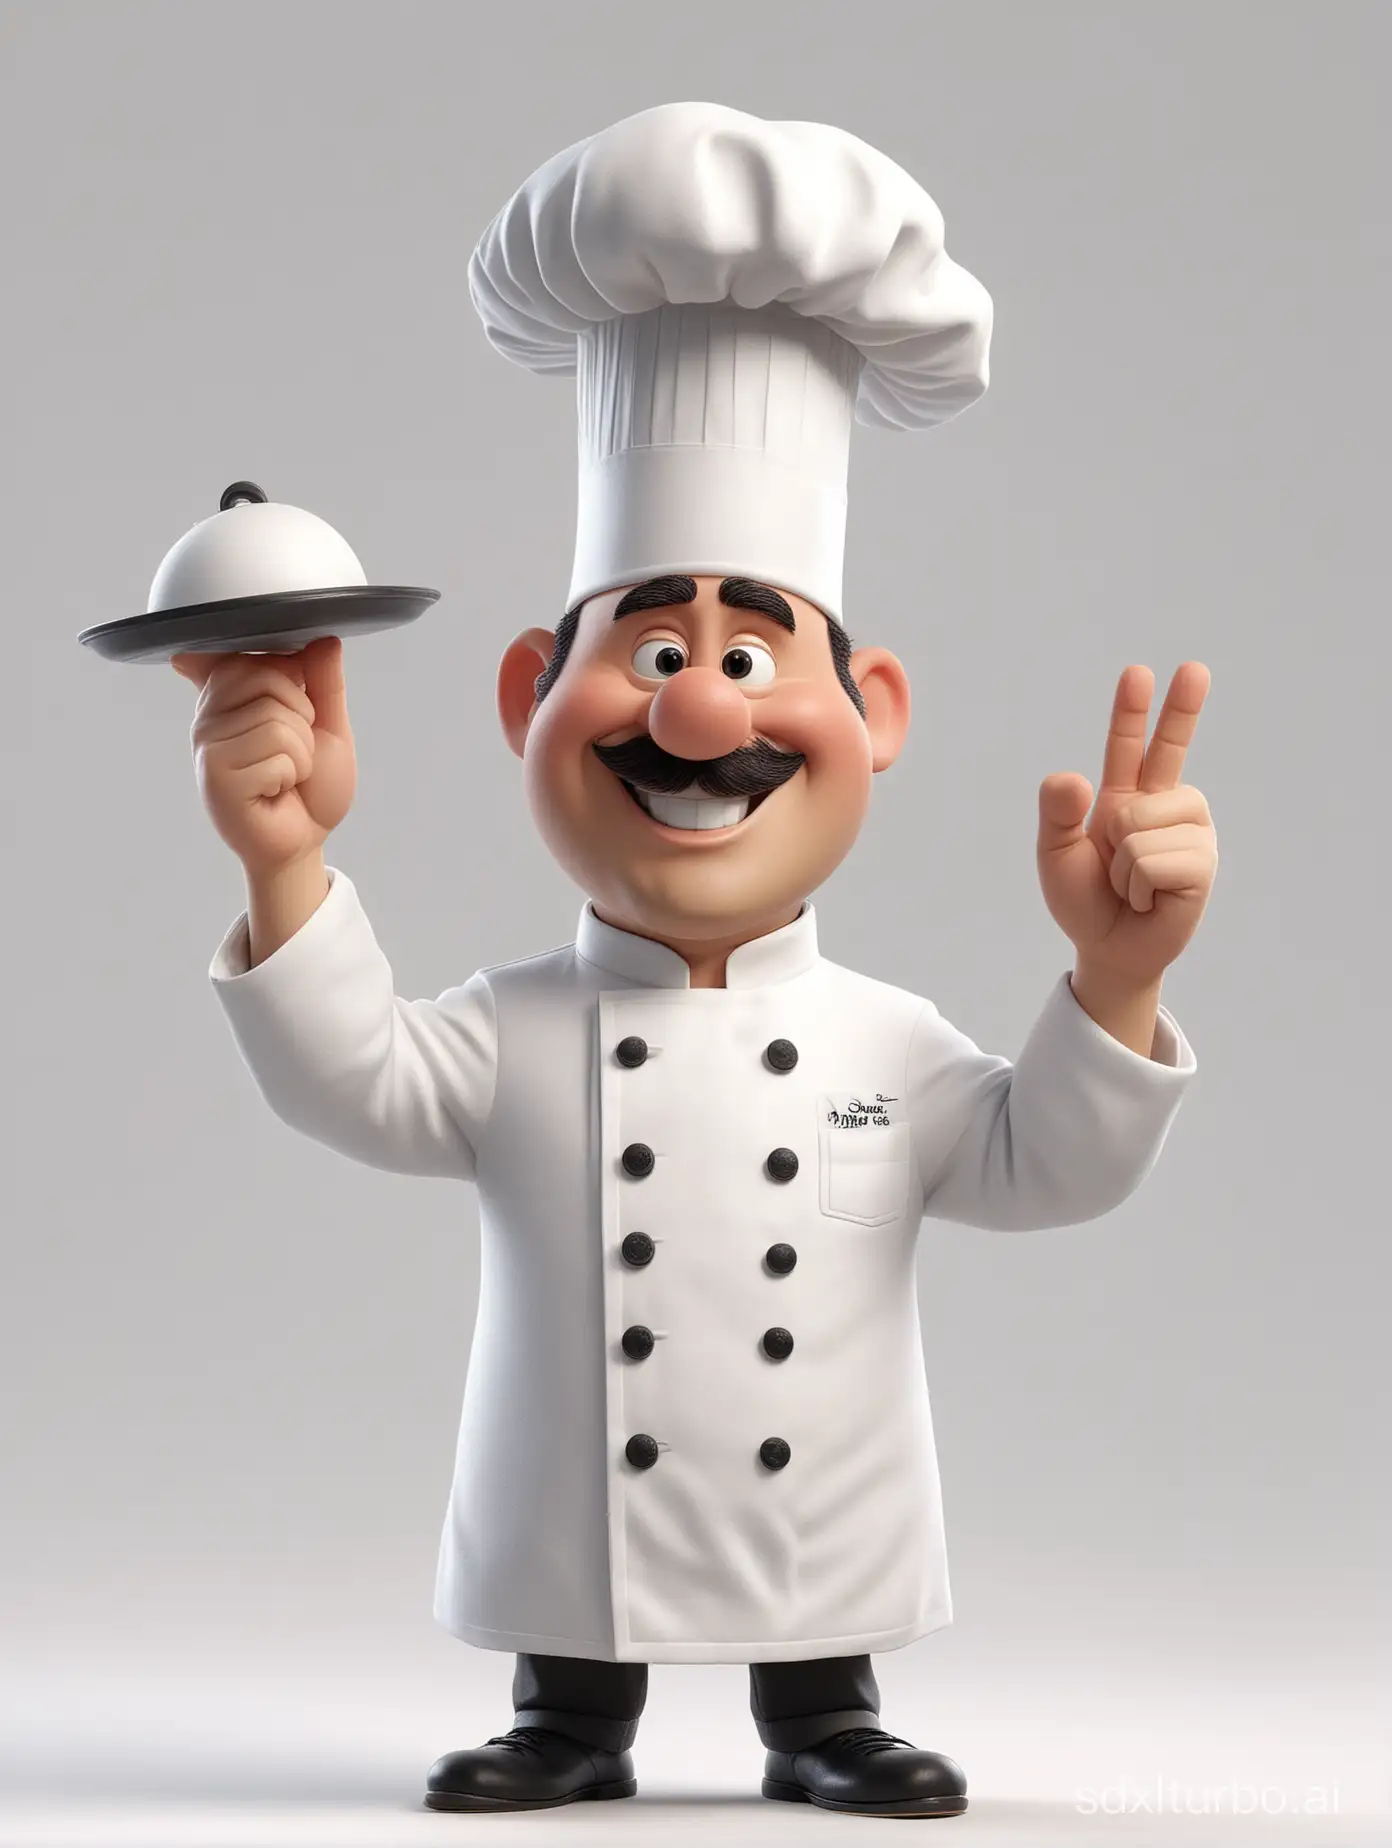 Quality: 8k, Disney-style, chef, white background, detailed depiction of chef in classic chef outfit and white chef hat, expert cooking gestures.